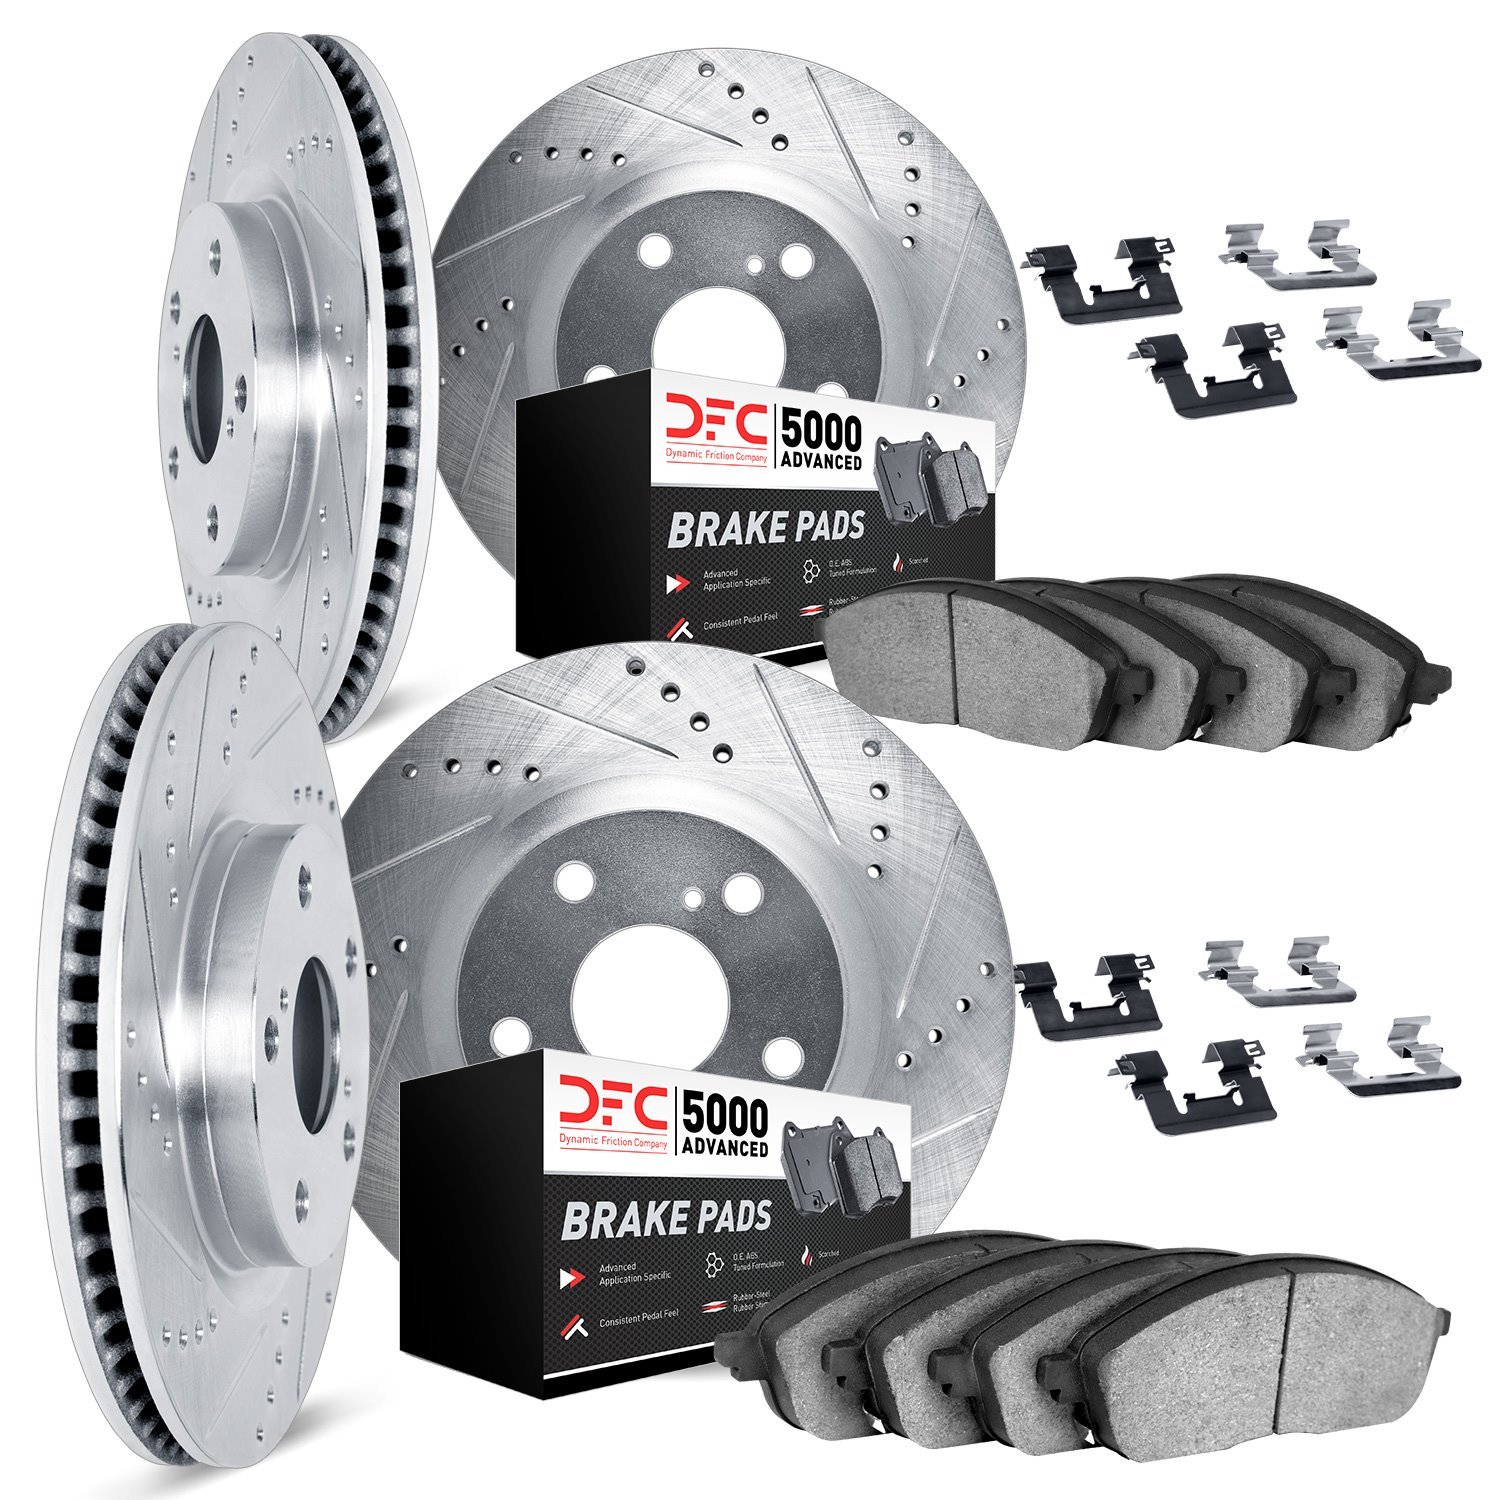 7514-31022 Drilled/Slotted Brake Rotors w/5000 Advanced Brake Pads Kit & Hardware [Silver], 2010-2015 BMW, Position: Front and R